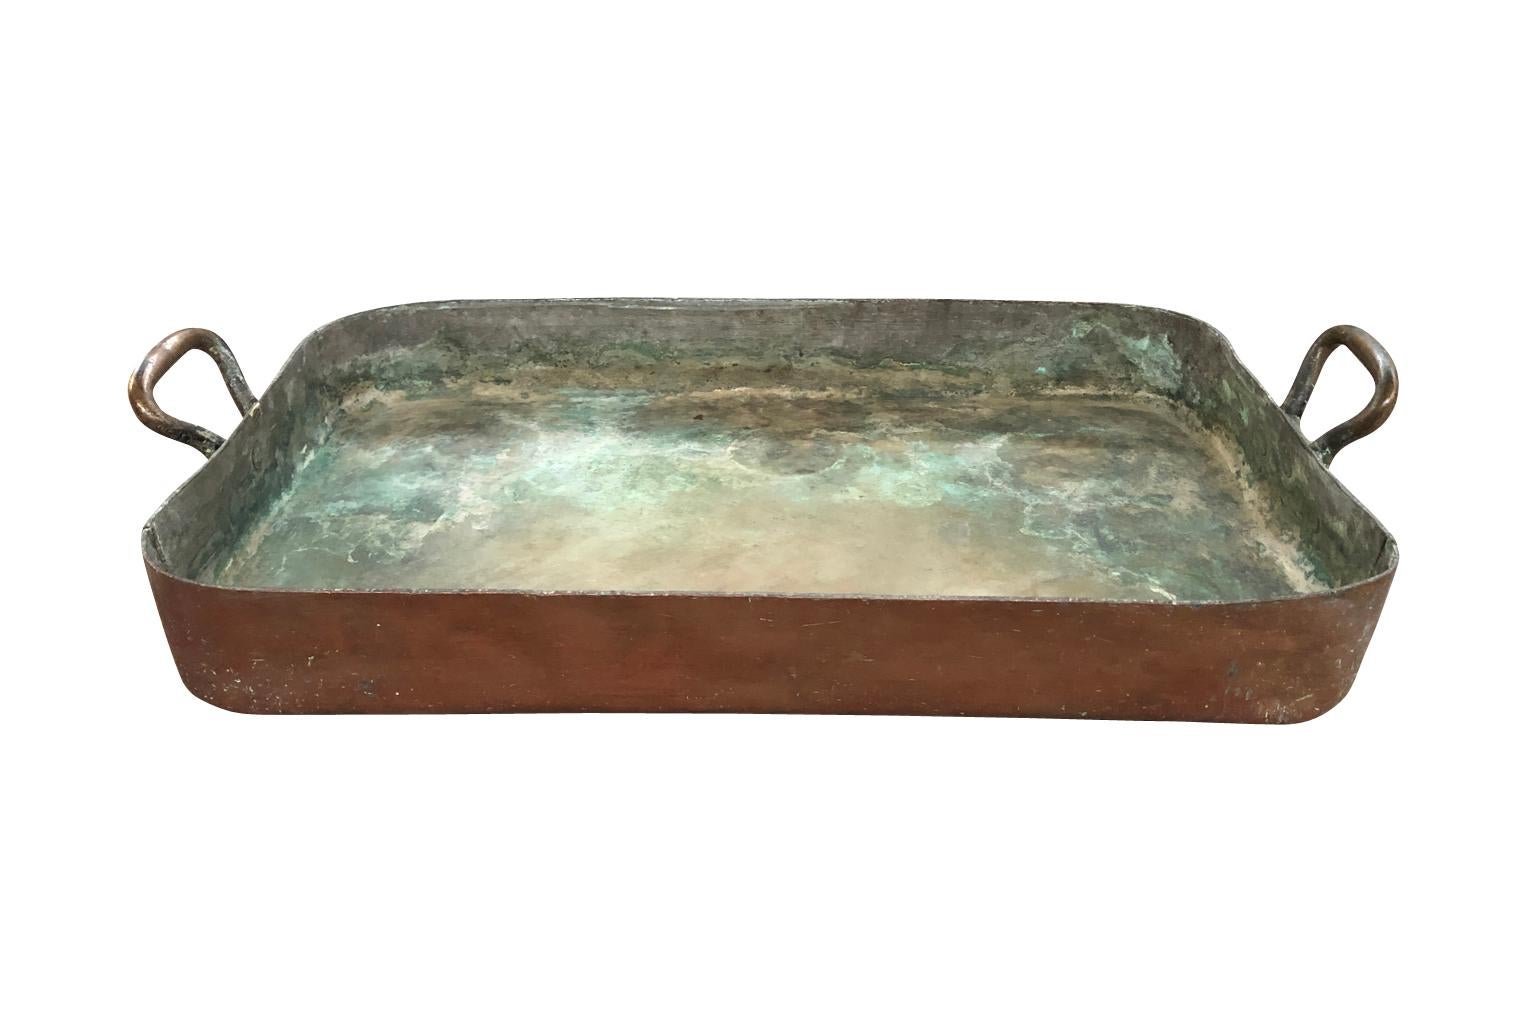 A wonderful 18th century grand scale pan in heavy gauge copper and brass handles from the South of France. Perfect as a center piece on a farm table or displayed on a kitchen island.